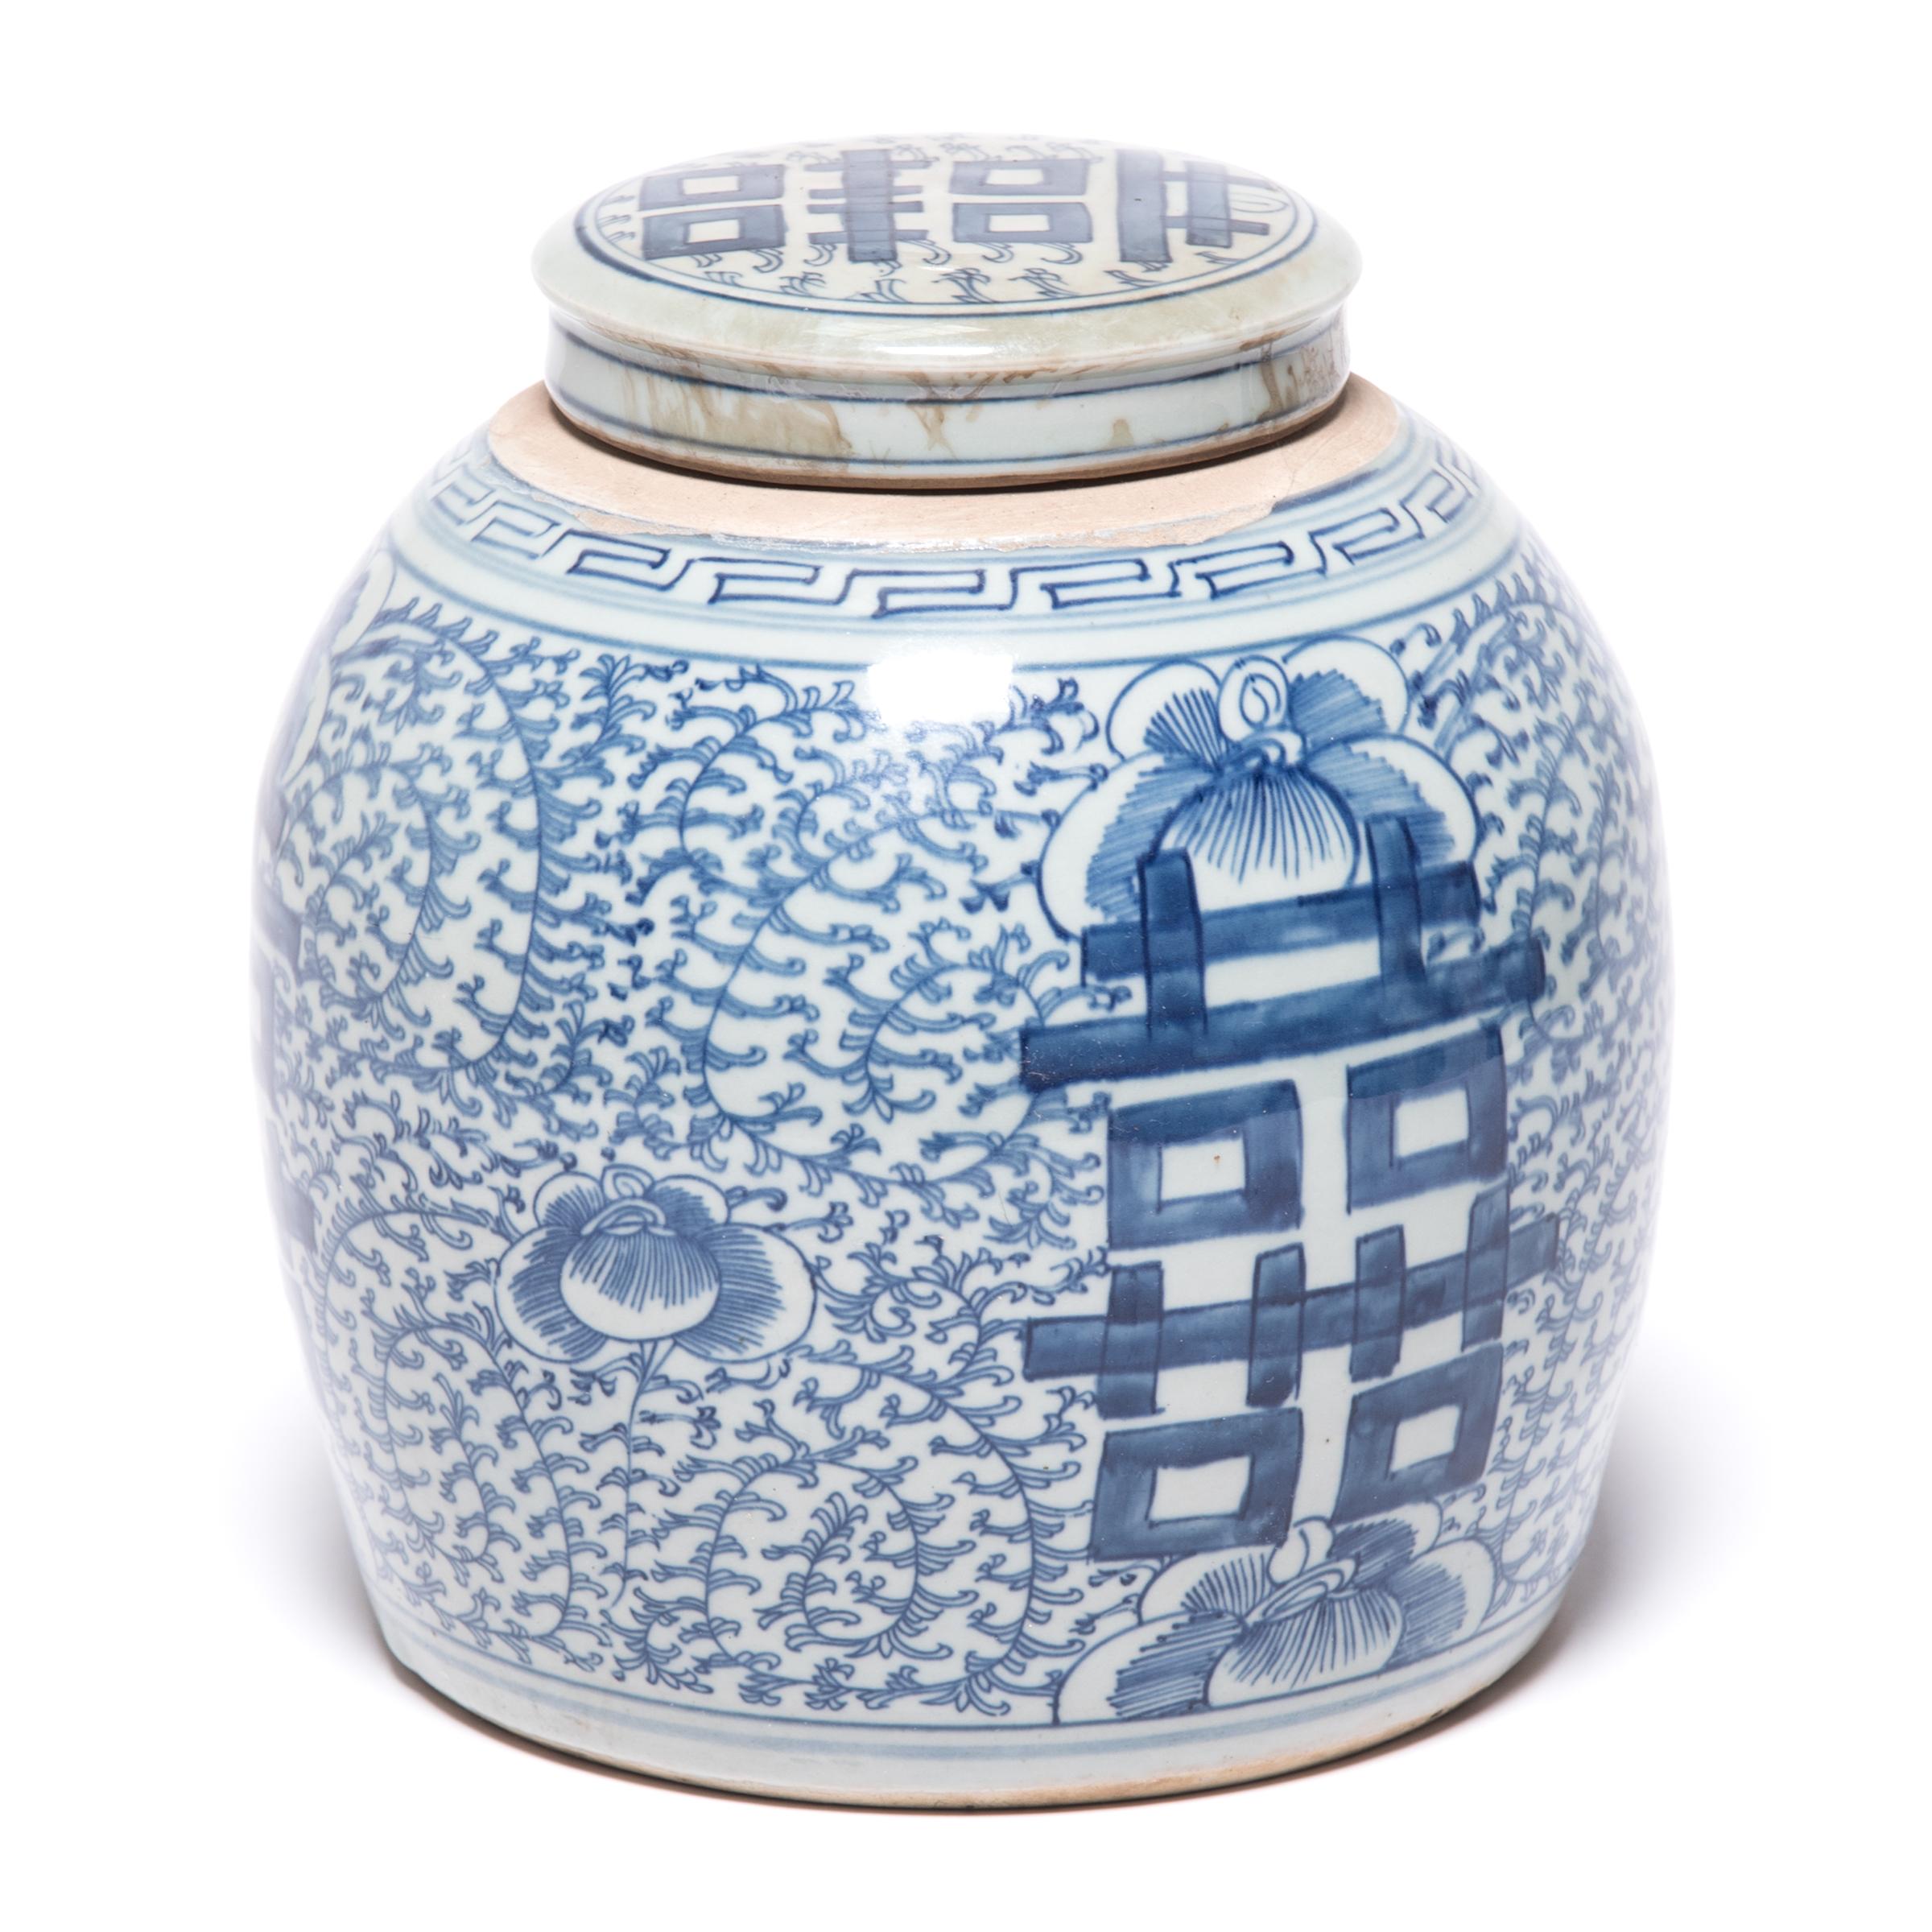 This early 20th century blue-and-white ginger jar was originally used for storing spices. Bordered by a simple Meander, the jar is densely patterned with trailing vines and orchid blossoms, symbols of love and beauty. On either side of the round jar